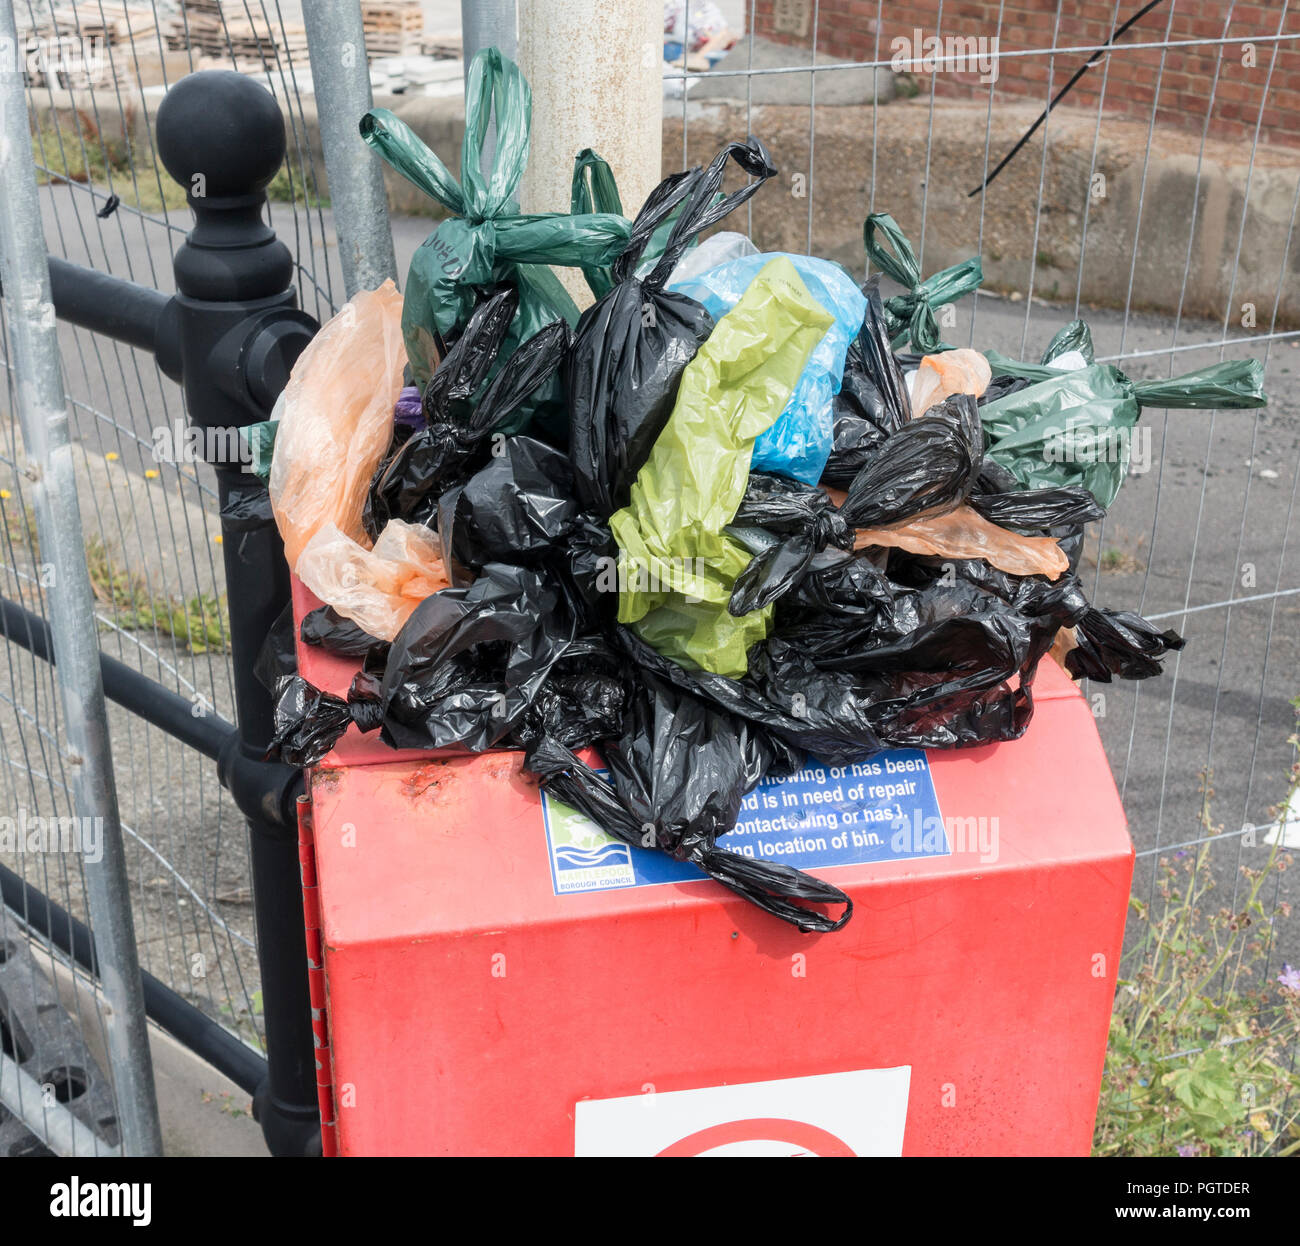 Bin overflowing with bags of dog poo. Stock Photo